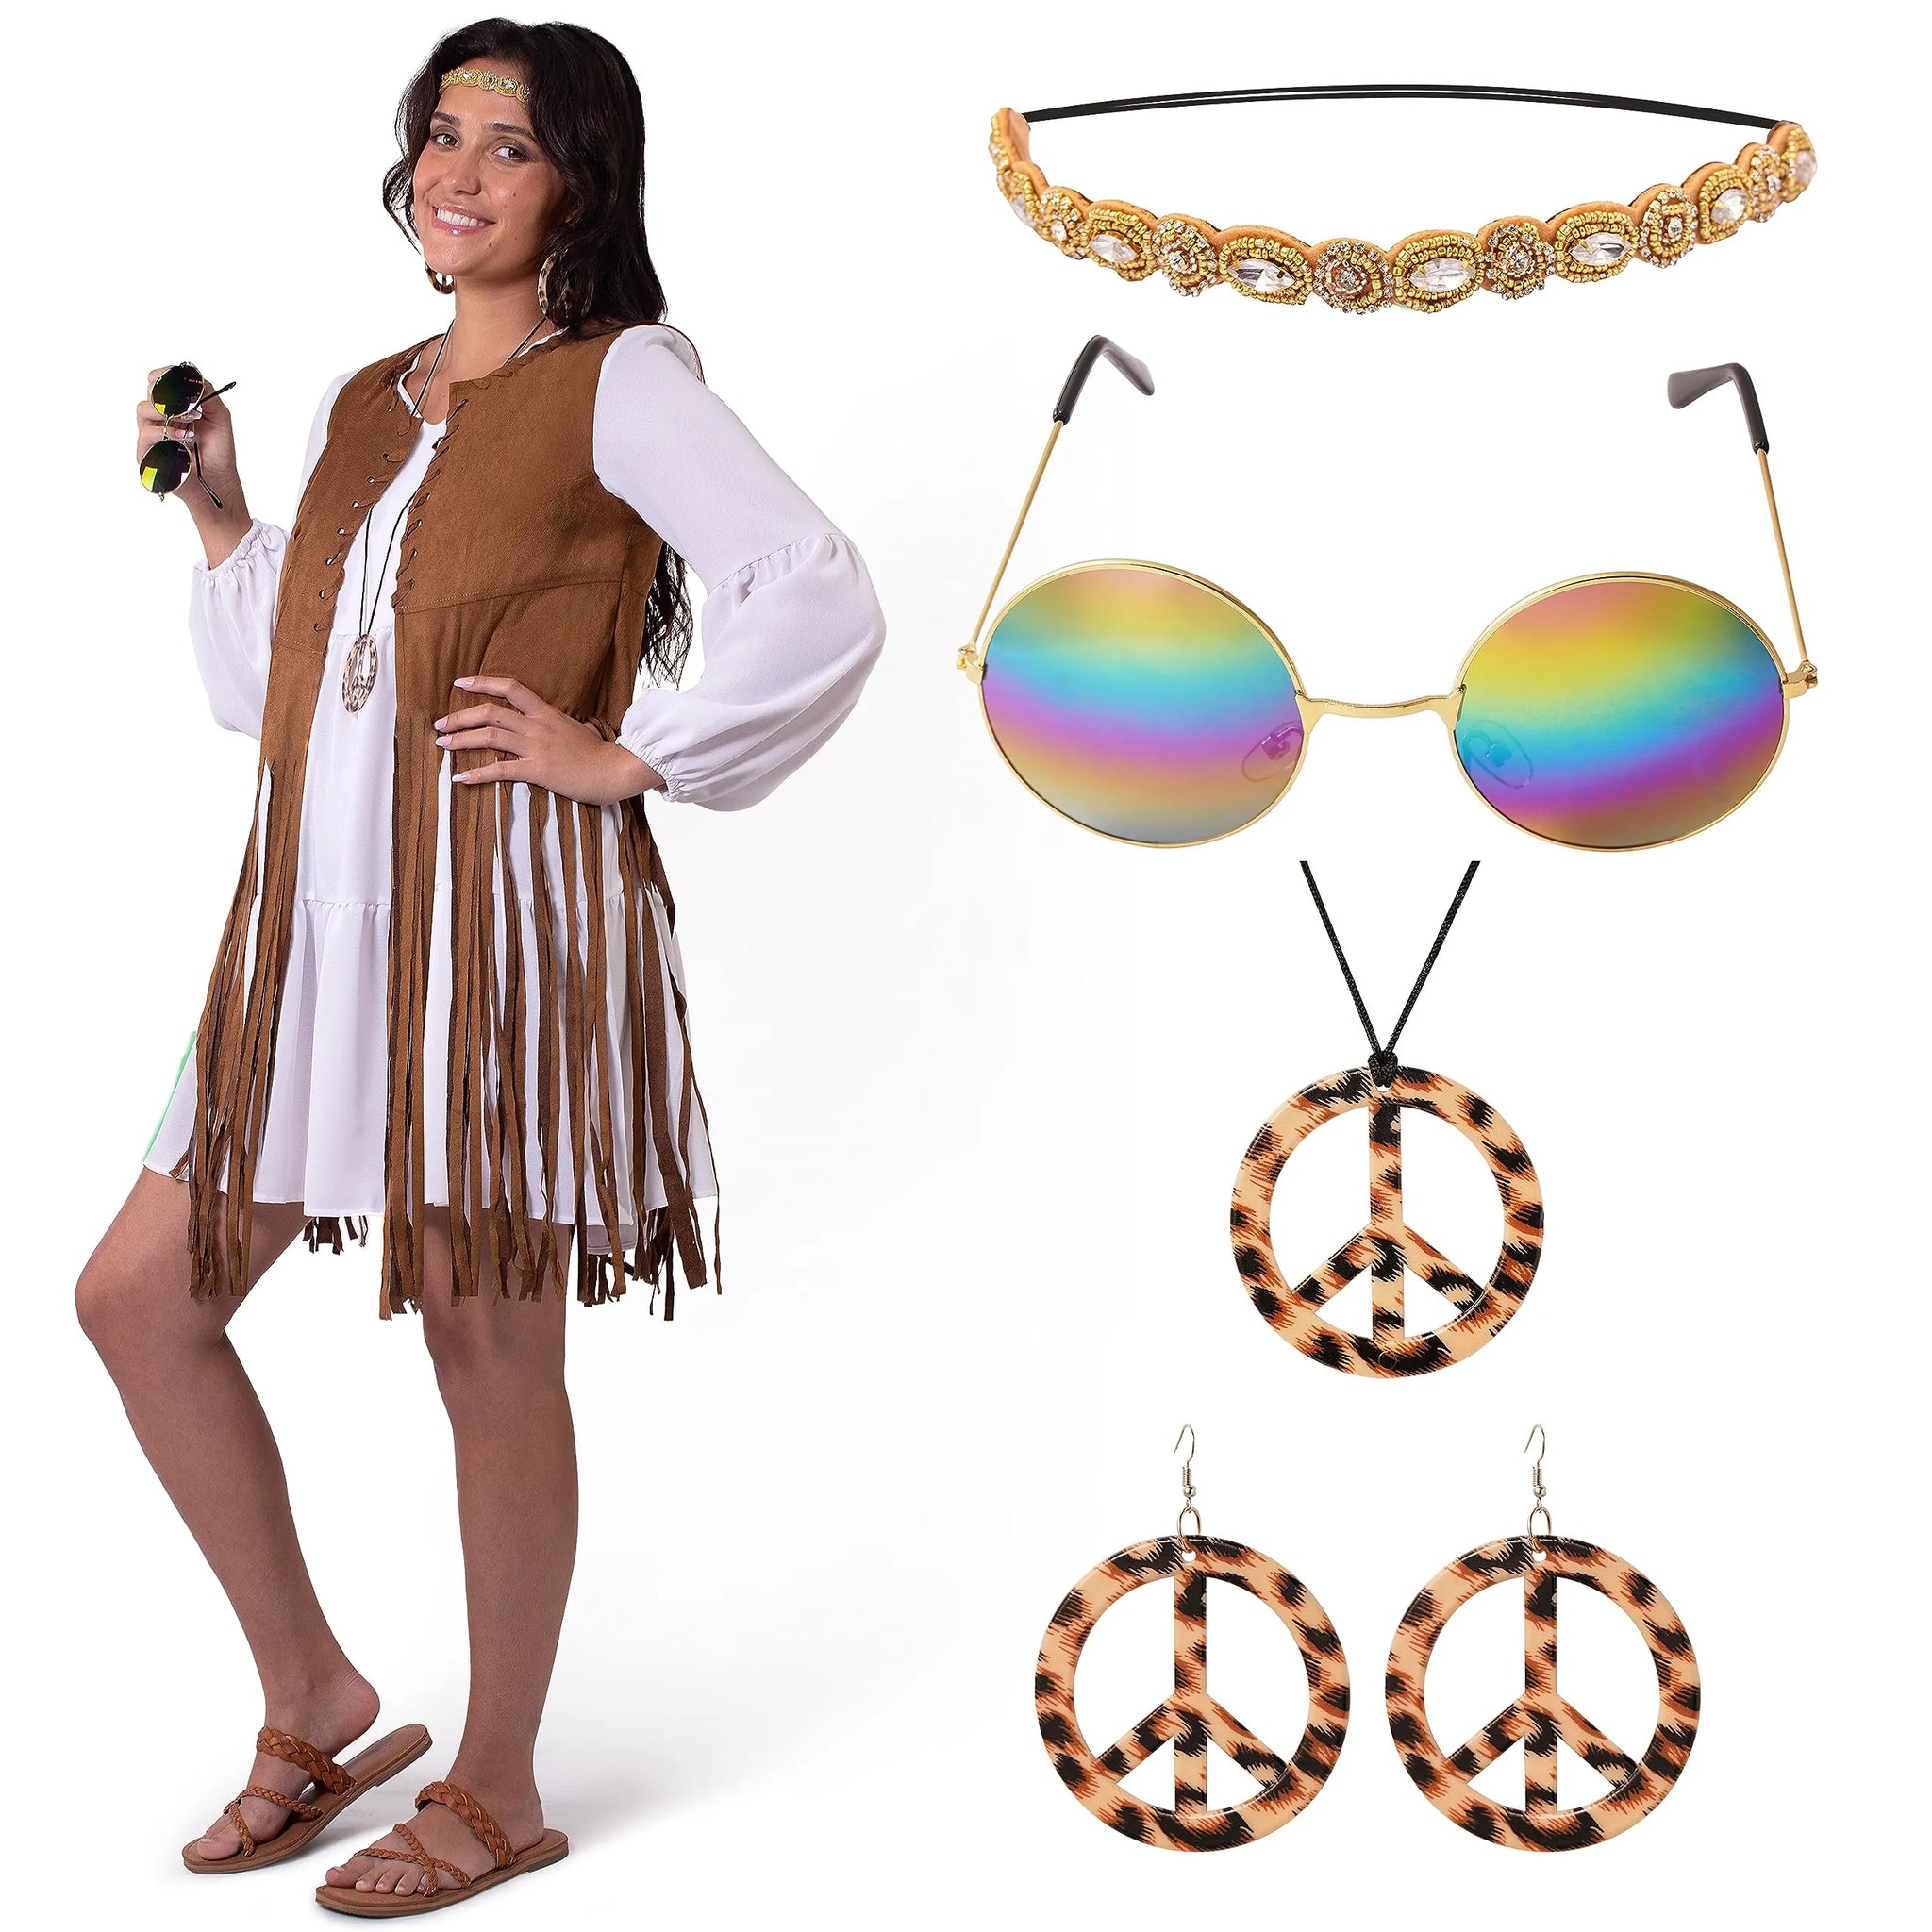 70s Costume Accessories Set - Hippie Earrings, Necklace, and